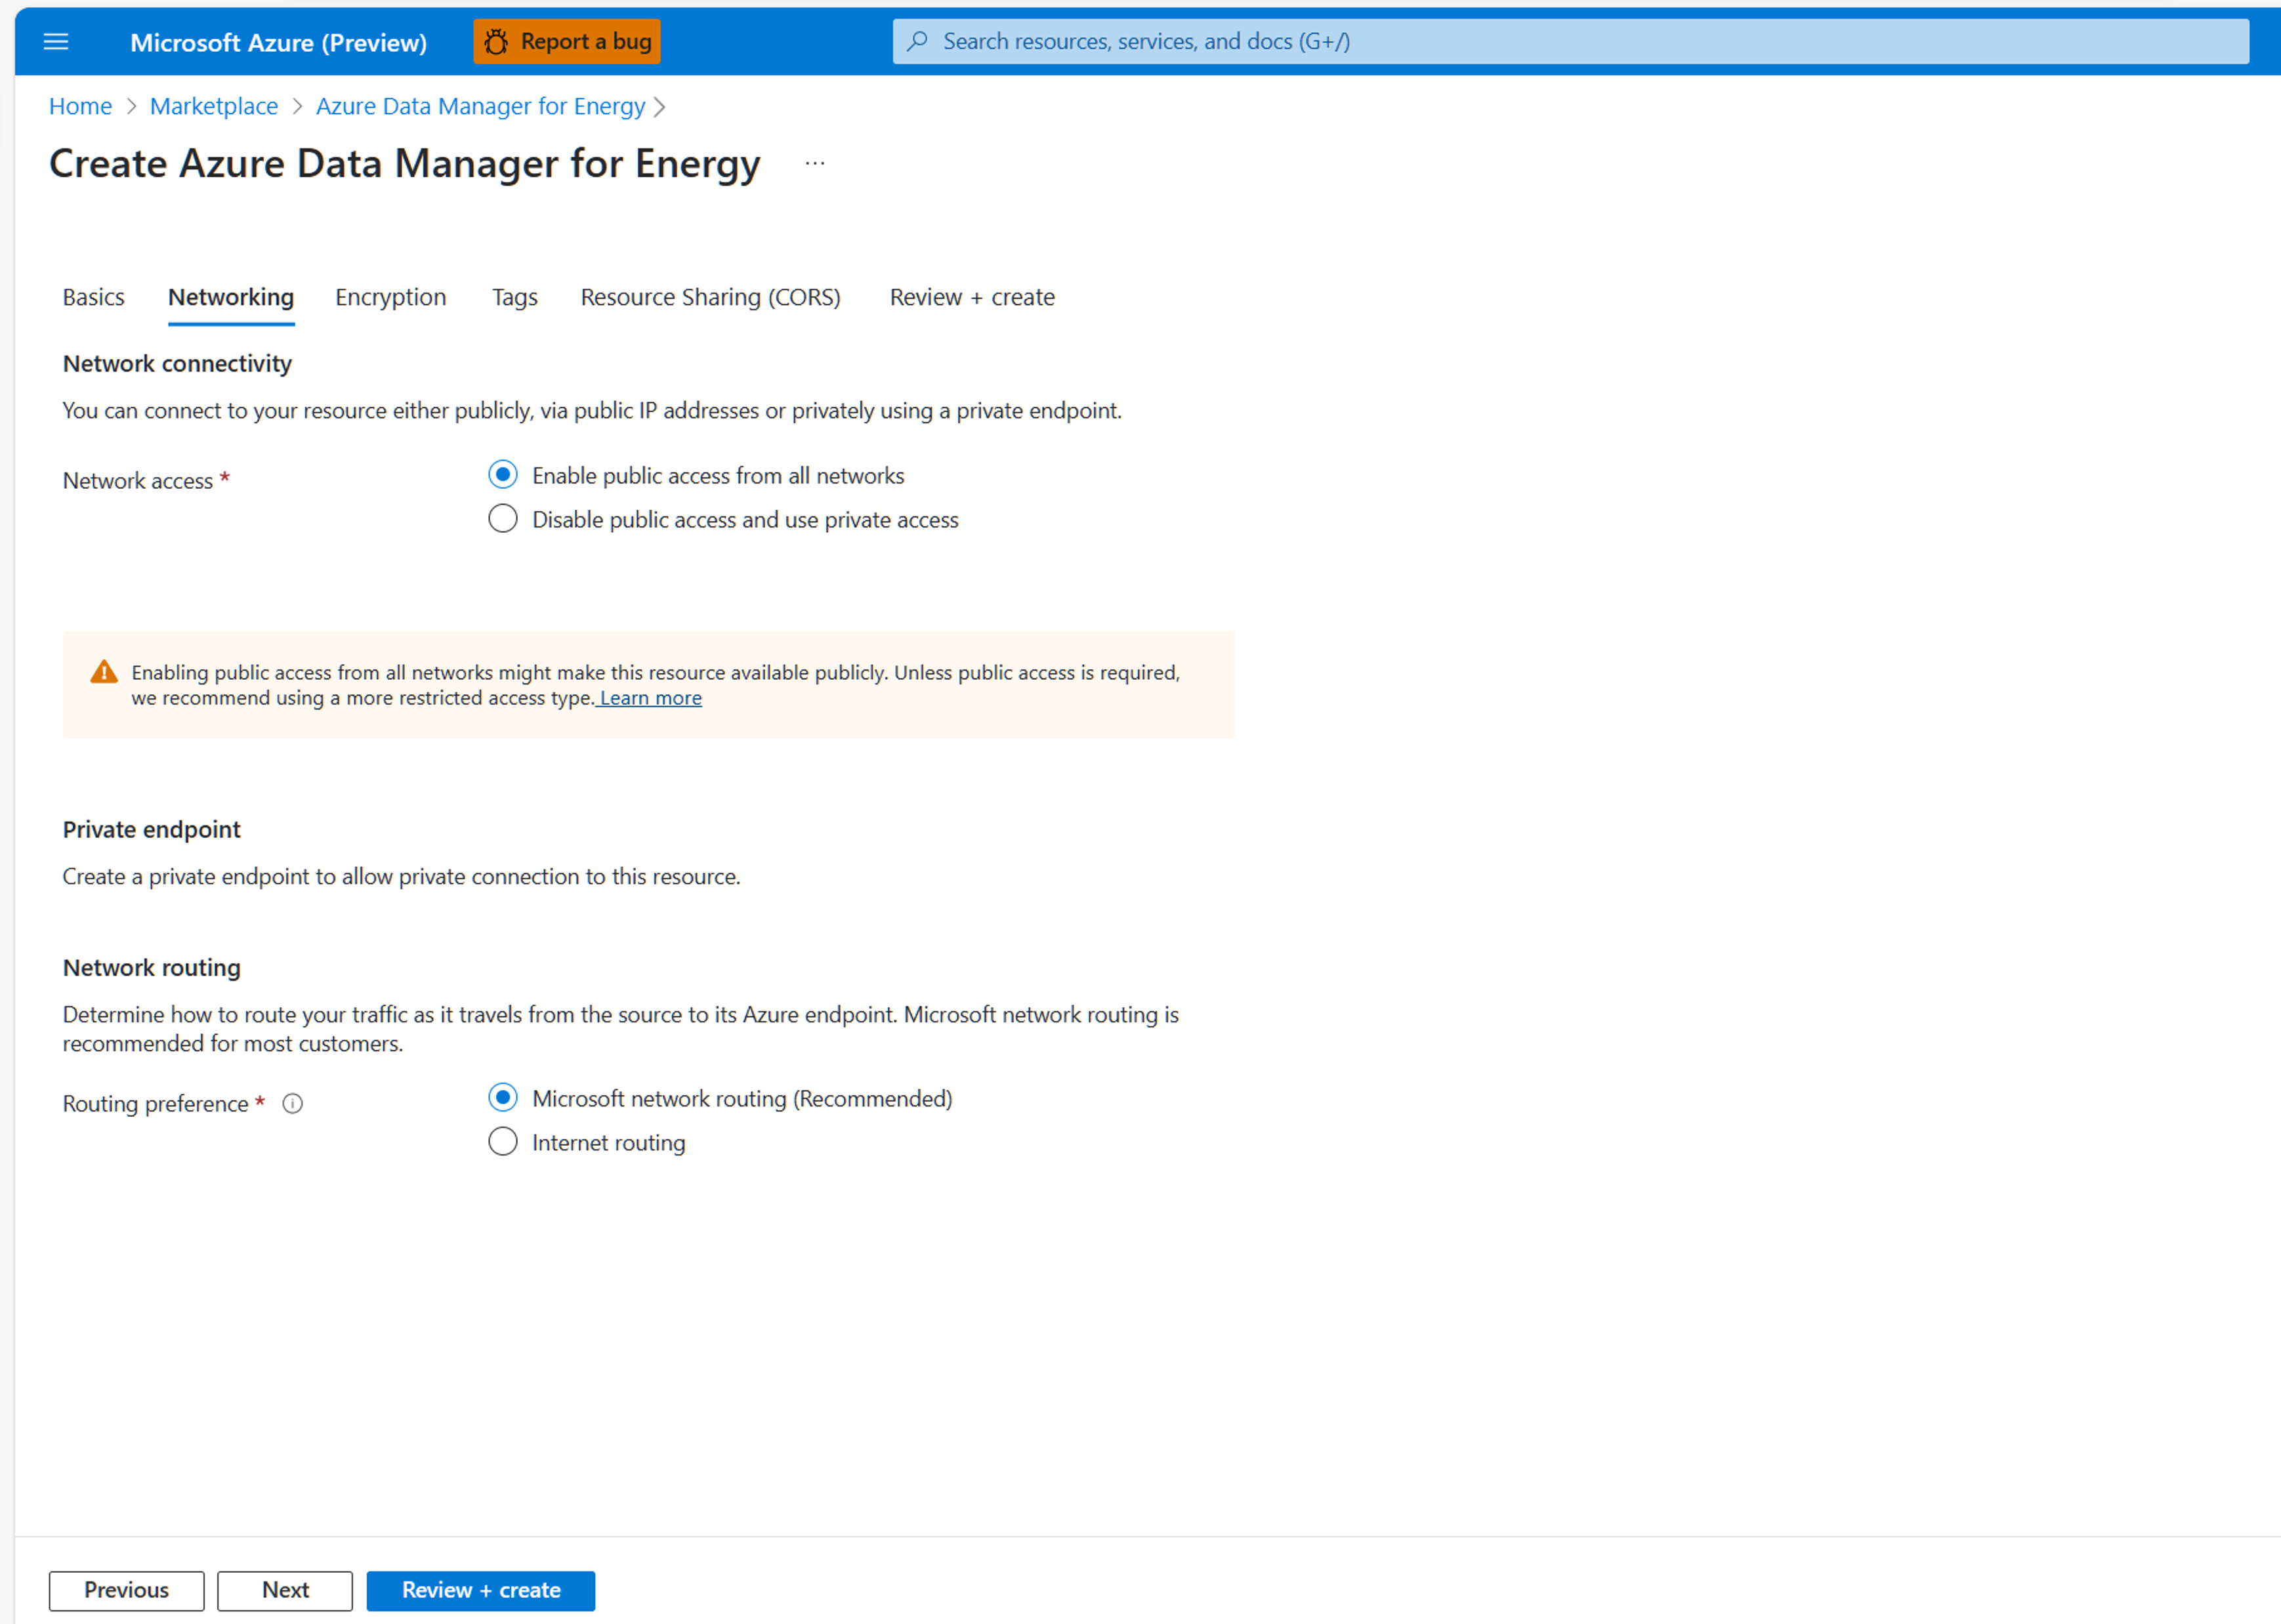 Screenshot of the networking tab on the create workflow. This tab shows that customers can disable private access to their Azure Data Manager for Energy.